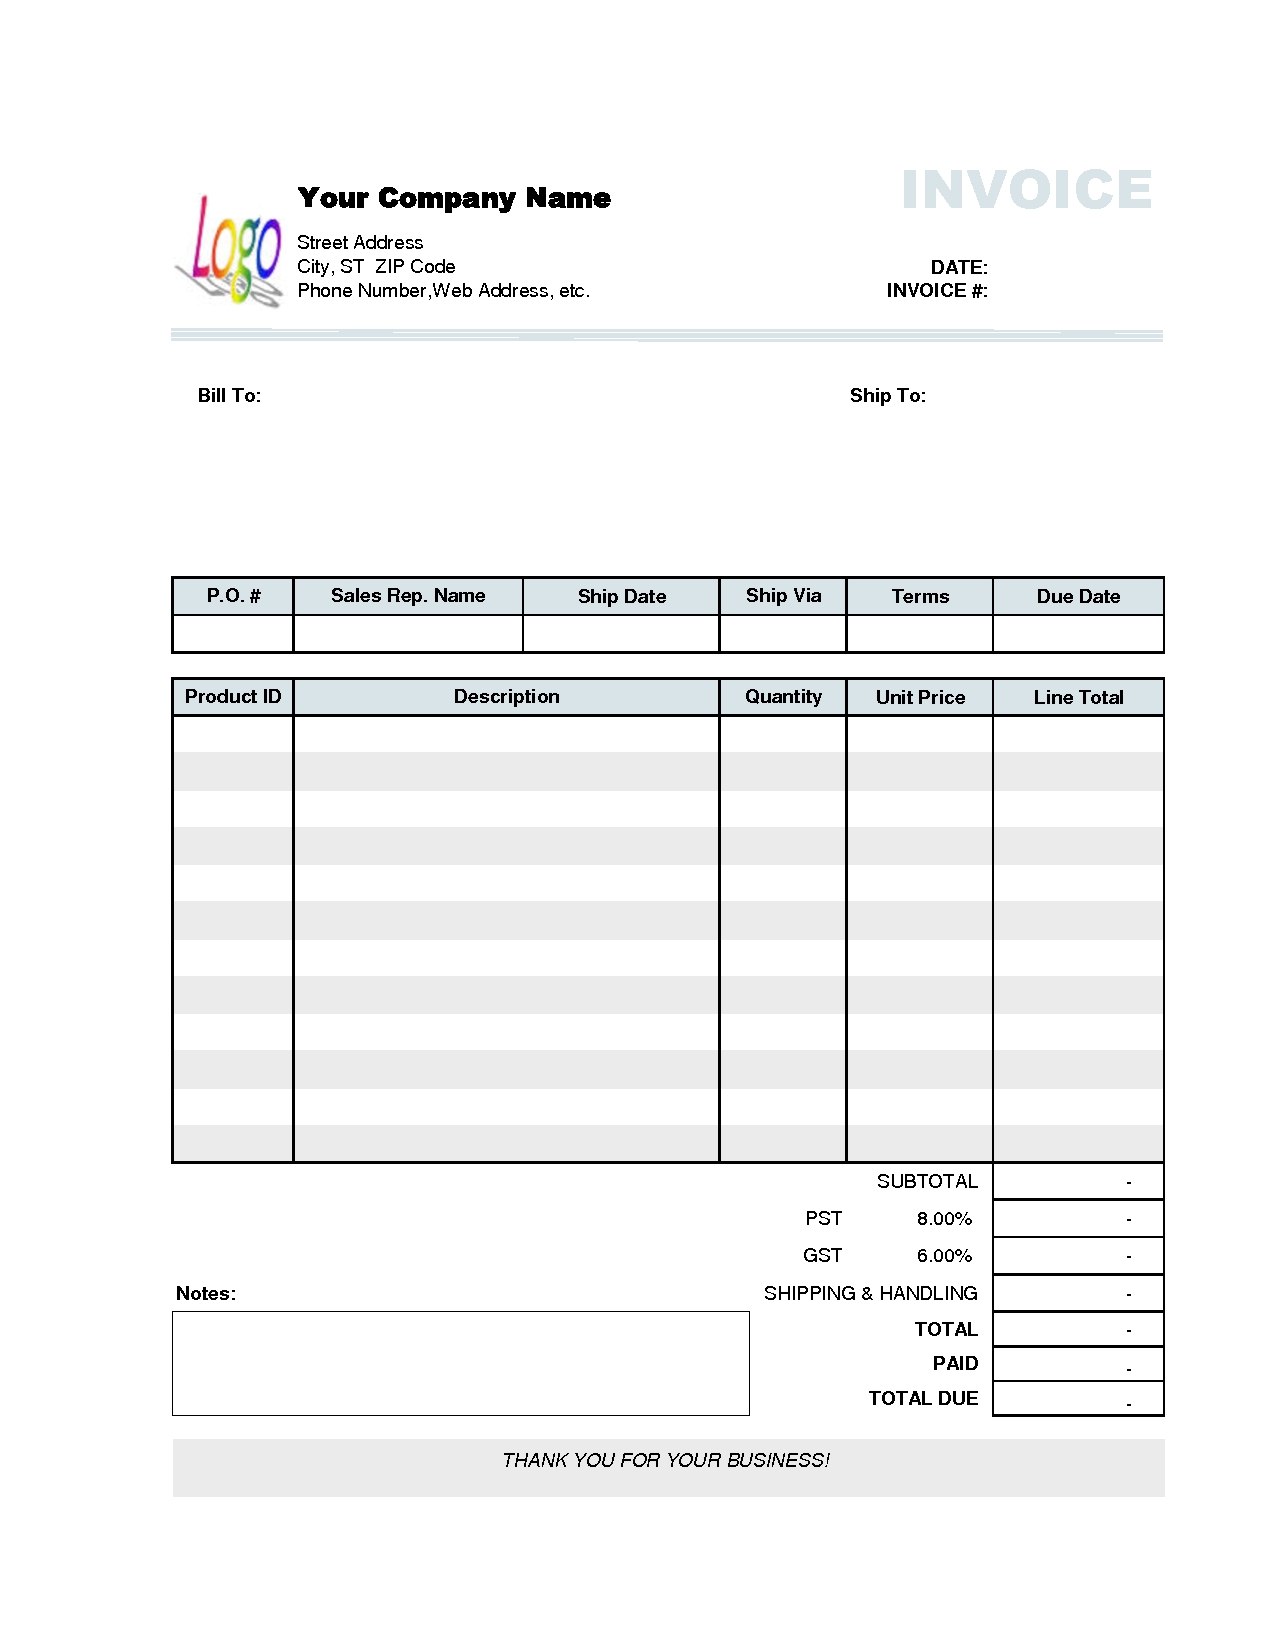 9 printable invoice templates samples and problems of invoicing free invoice sample